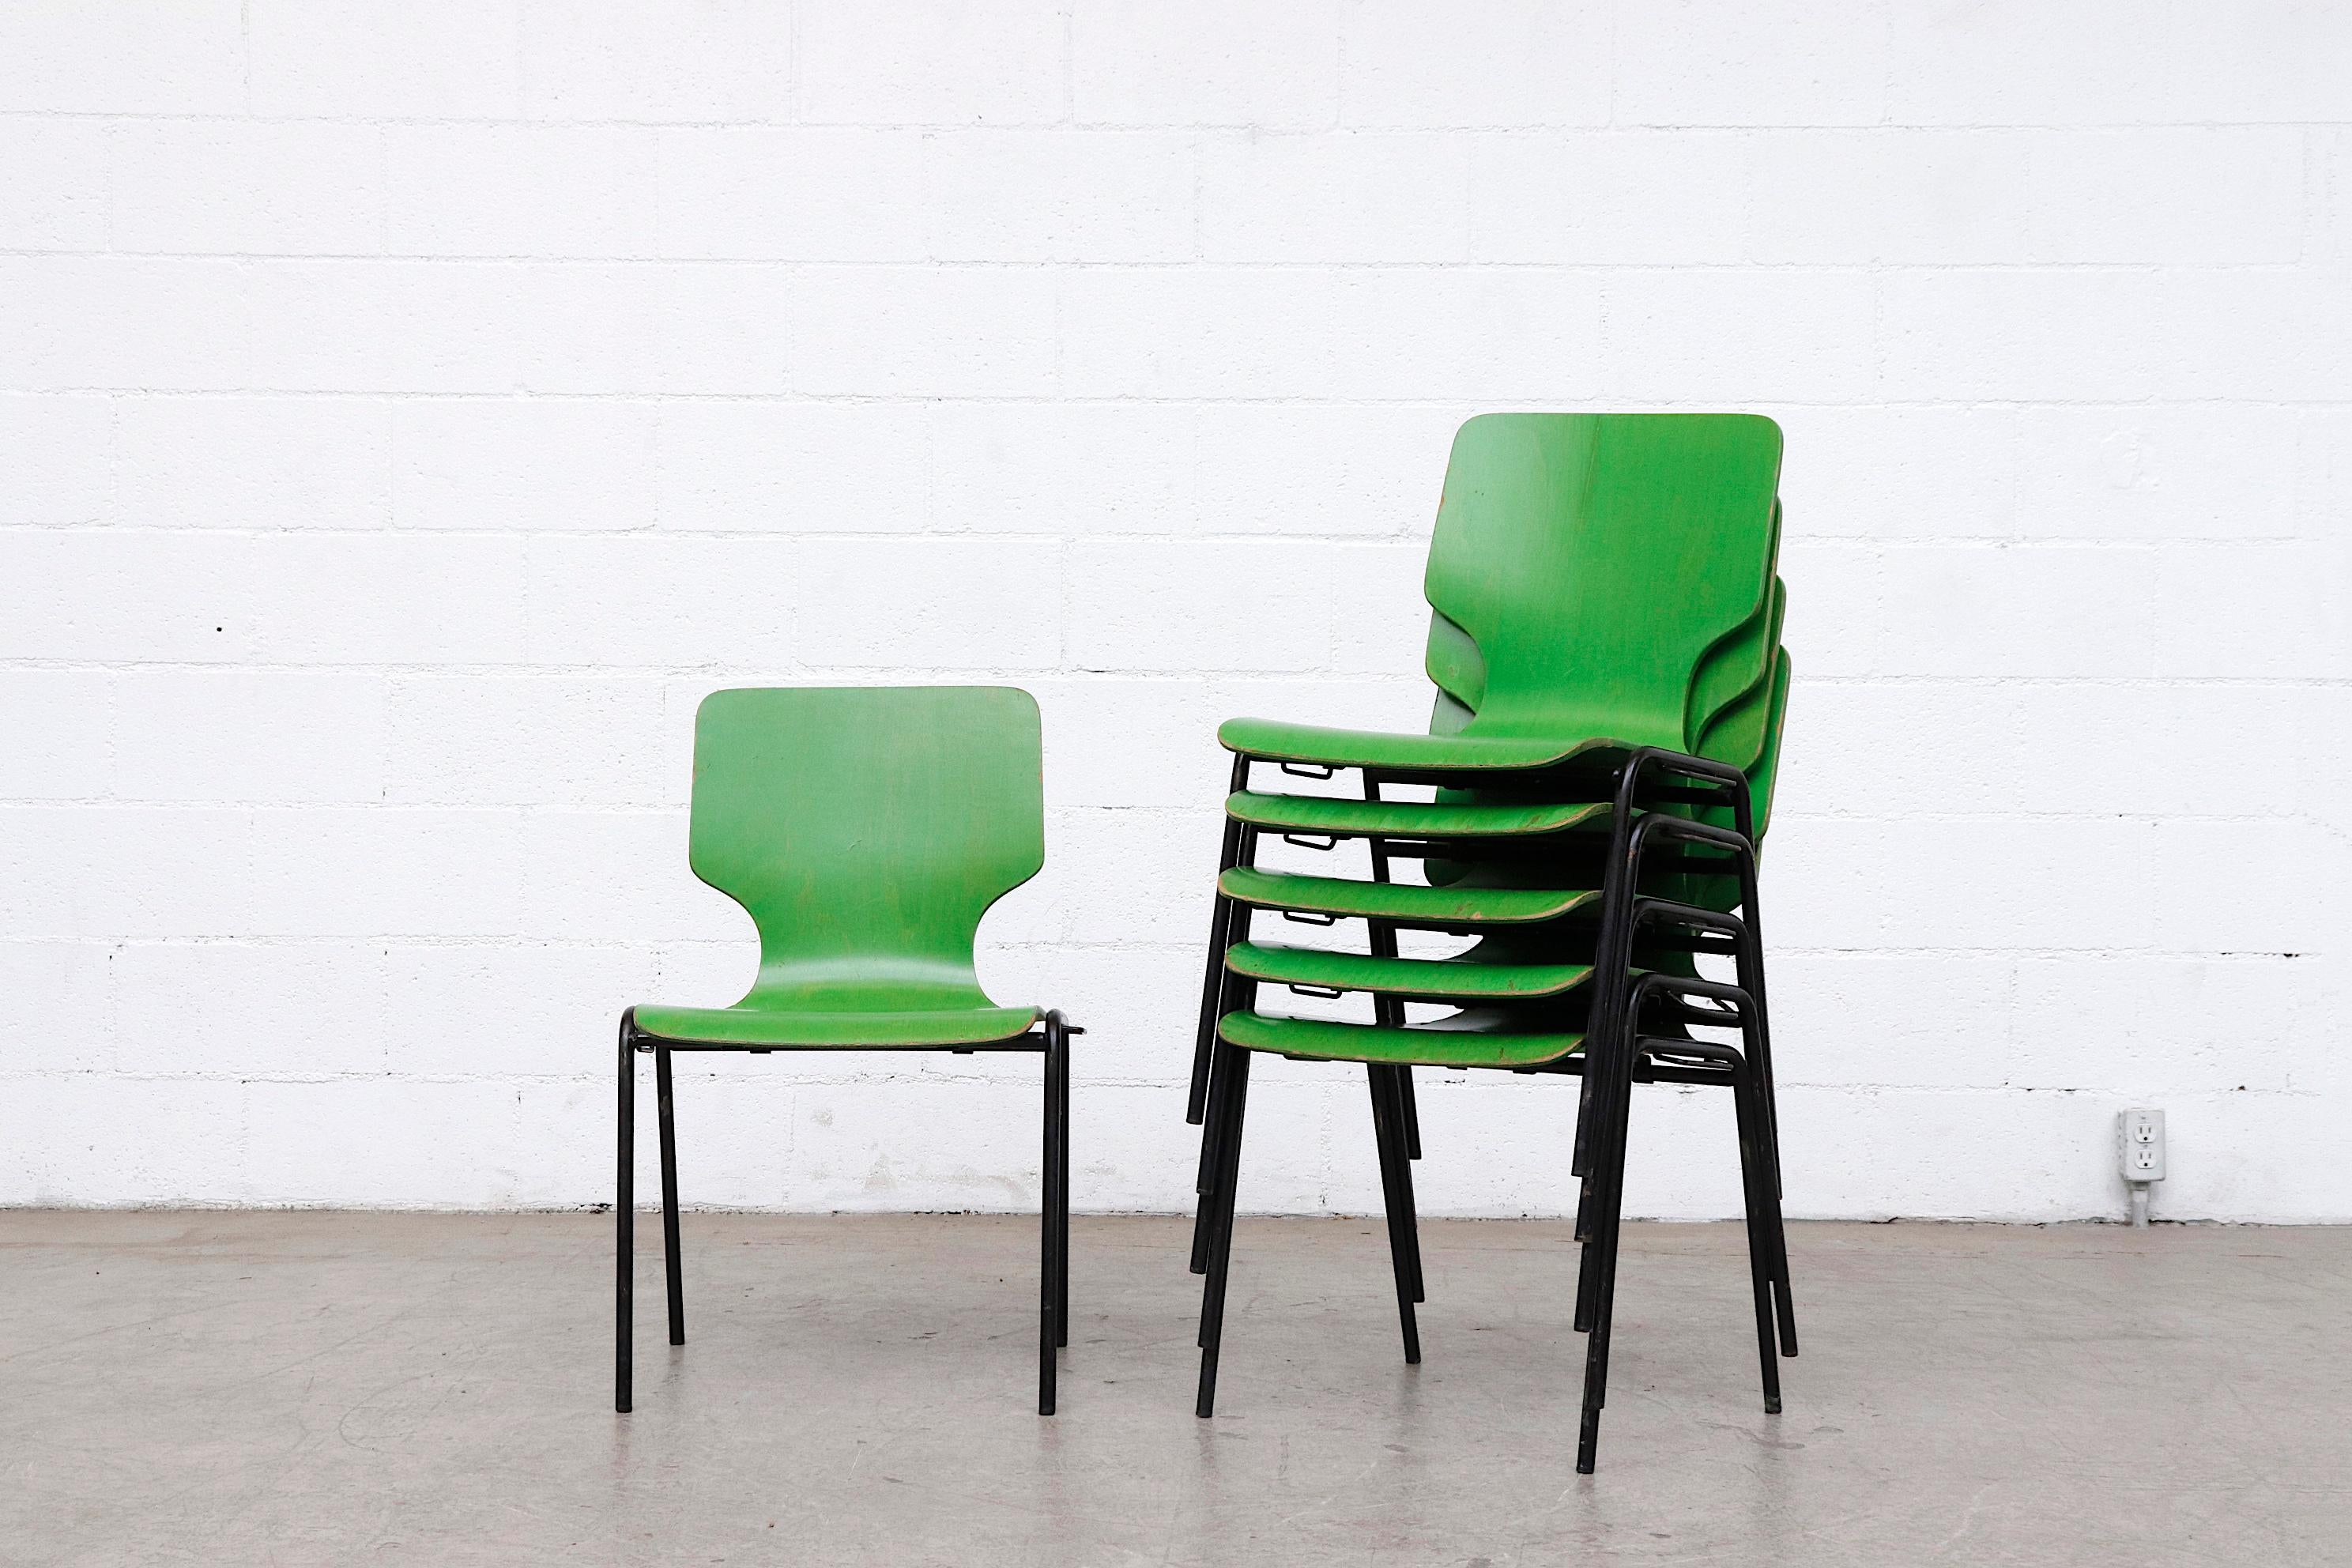 Fritz Hansen style green stained plywood seat with black enameled metal frames and side hooks that enable them to connect into rows. In original condition with visible wear and chipping. Lead time from time of order is 10 days.